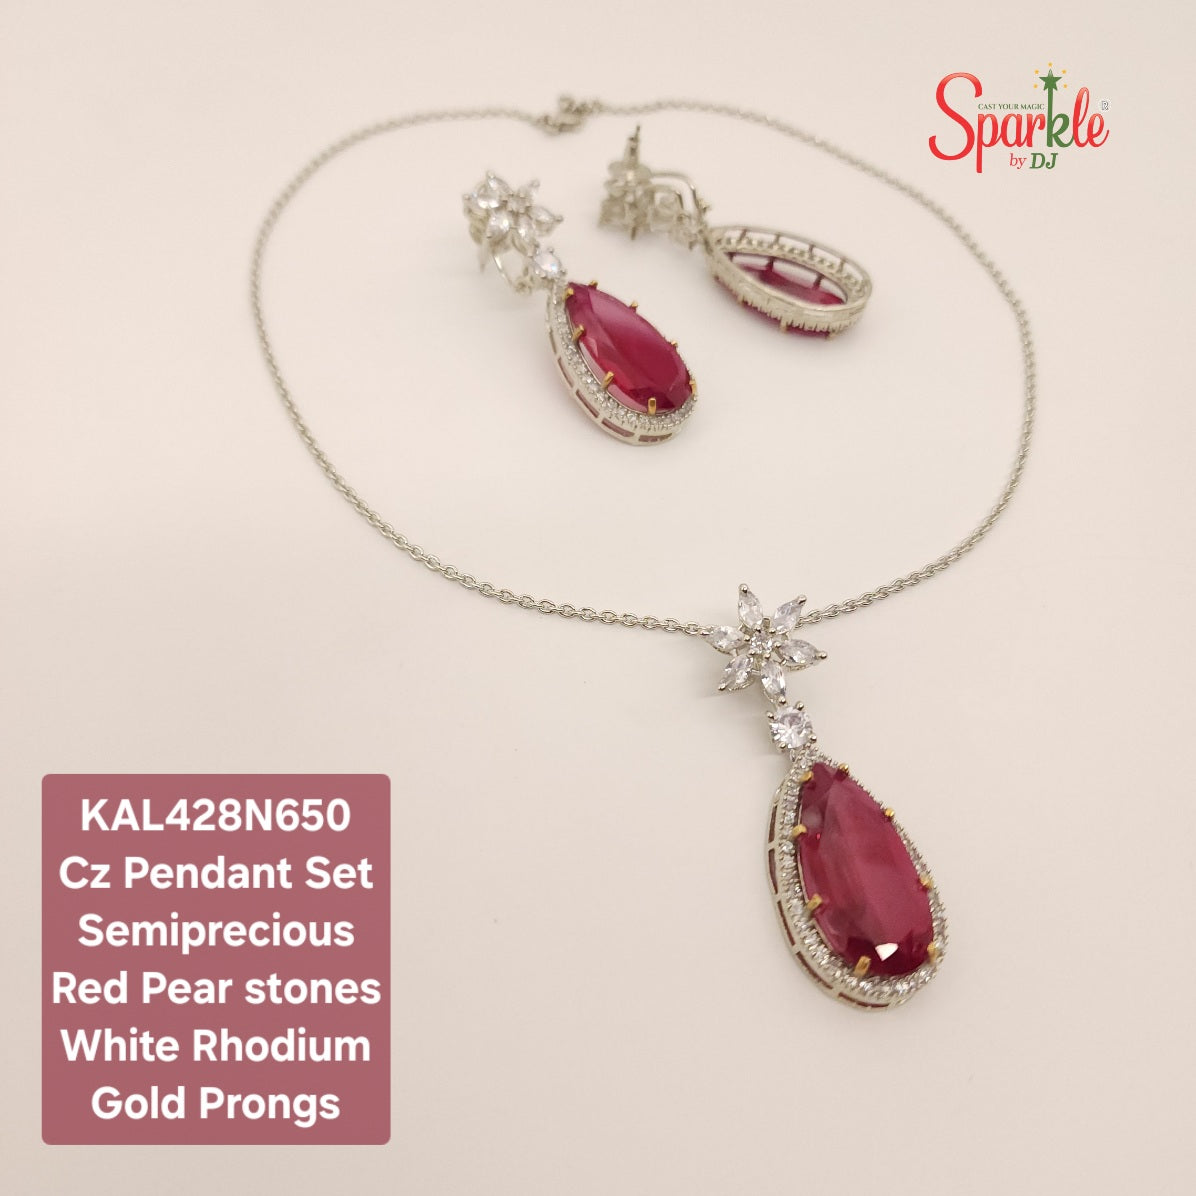 Cz Floral Pendant set embellished with Pear shaped semiprecious stones